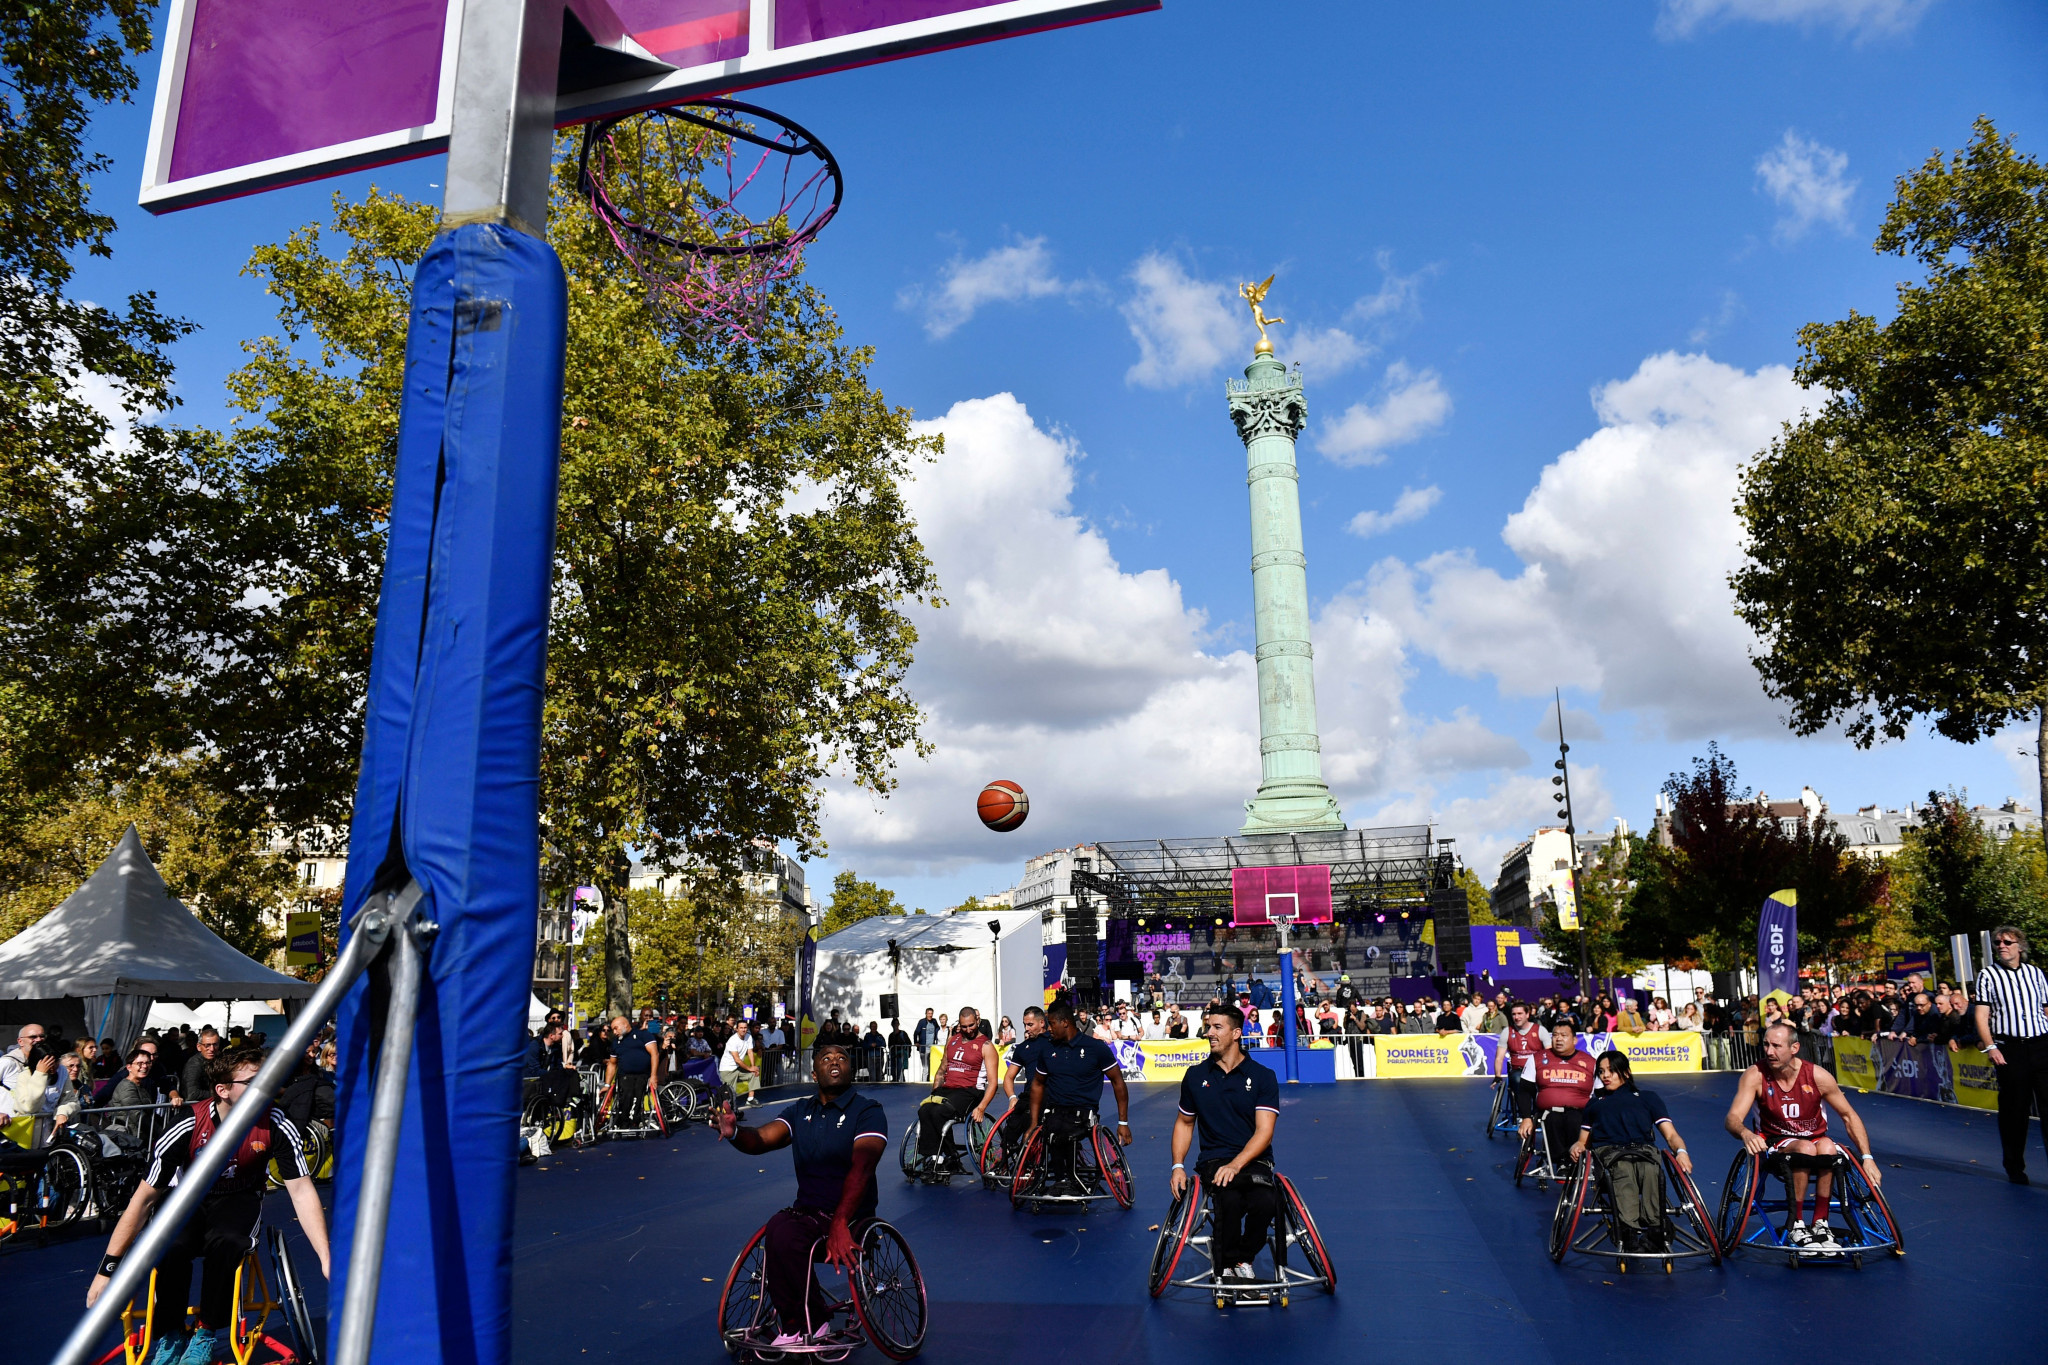 Paris is set to host the Paralympics for the first time in 2024 ©Getty Images